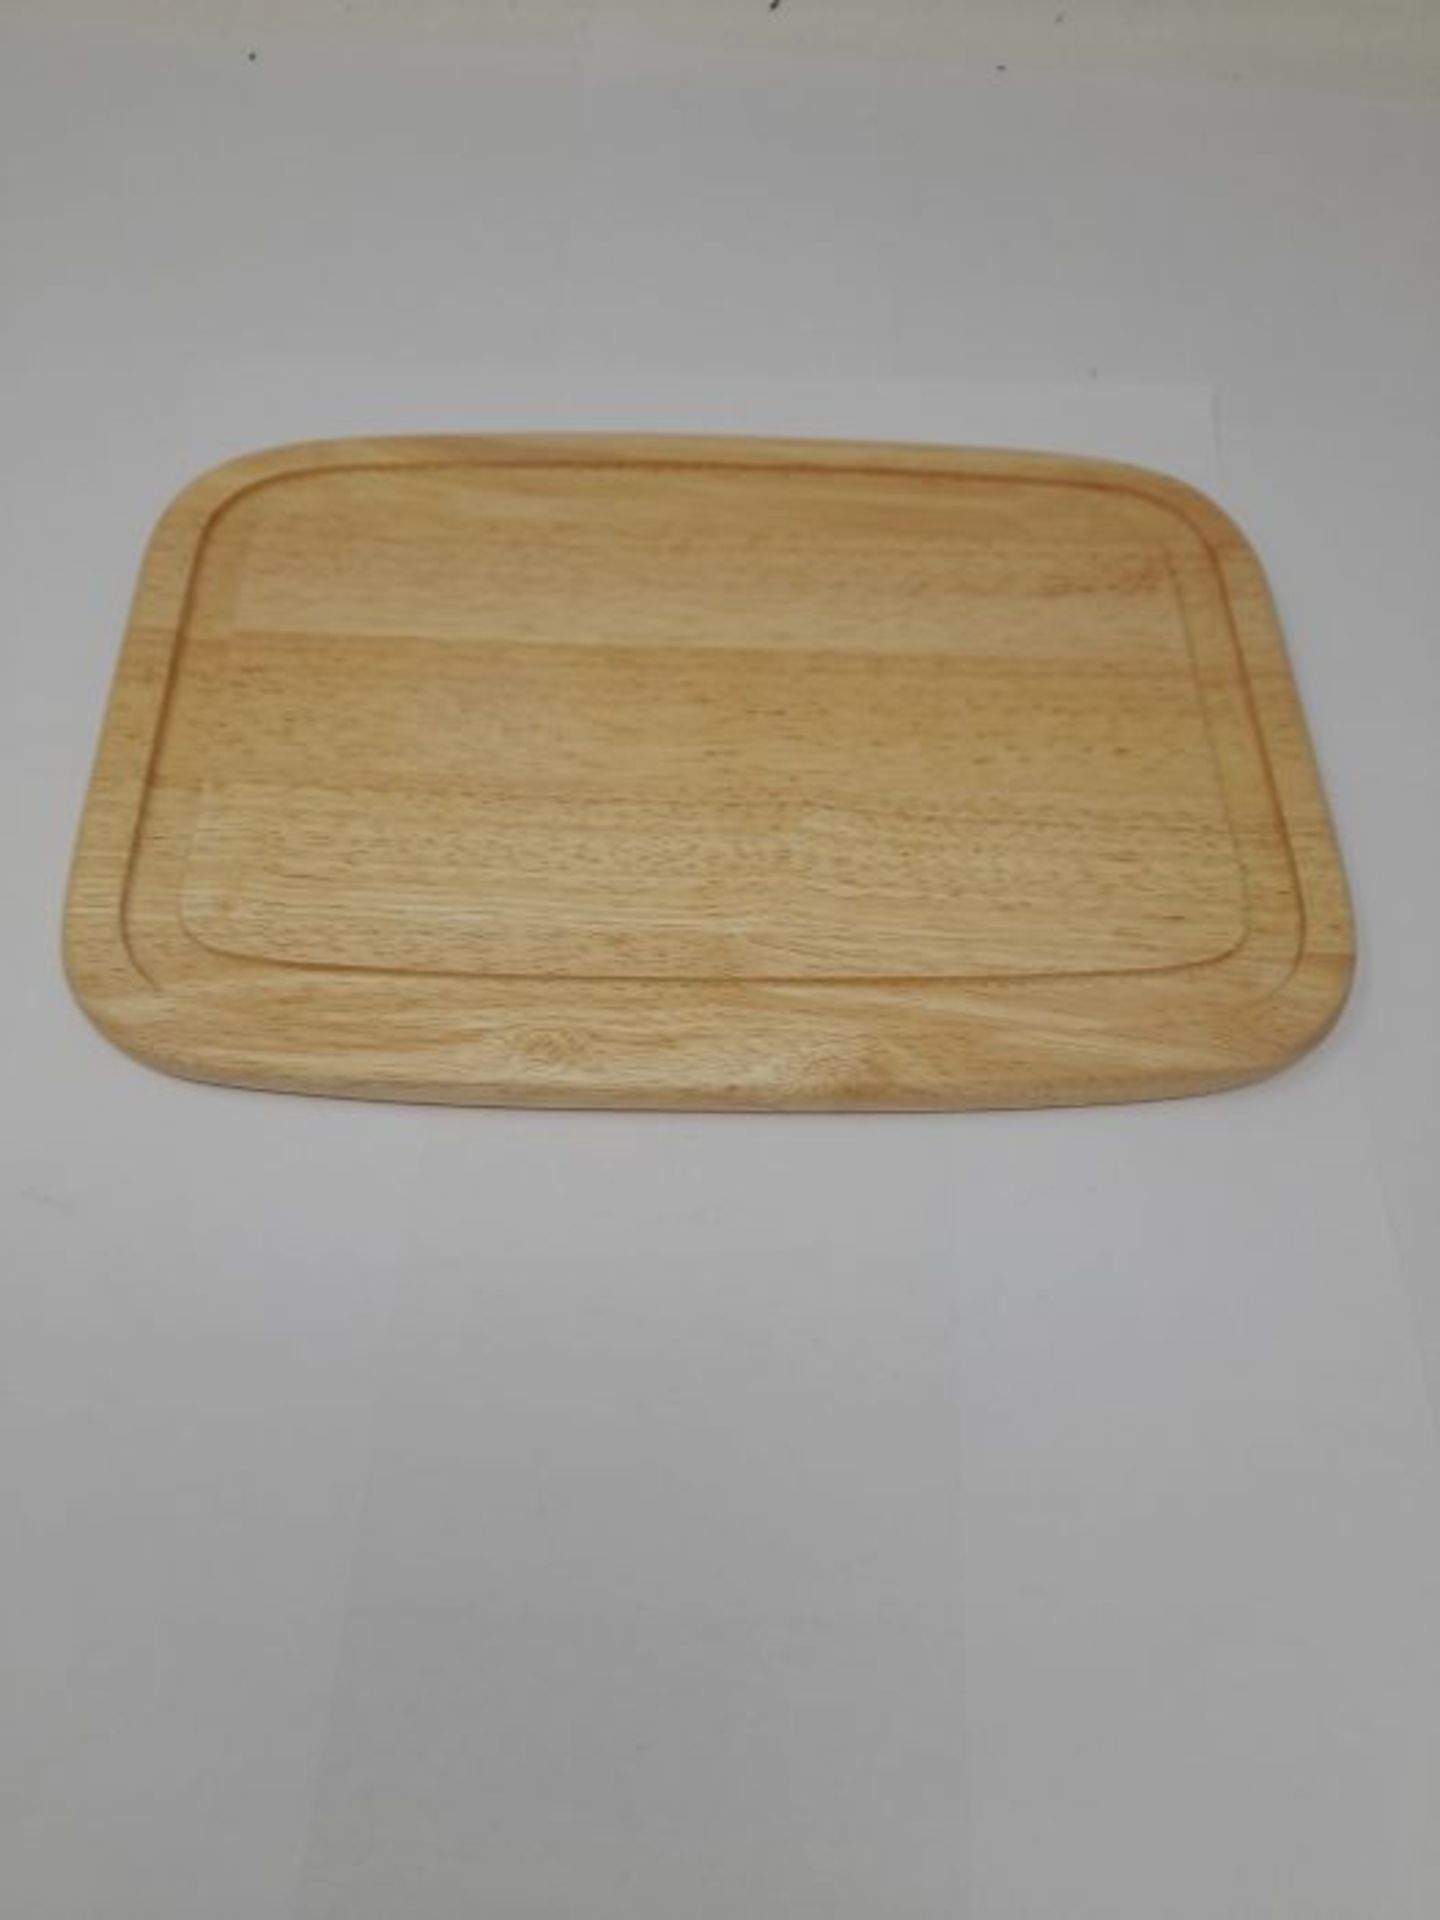 [INCOMPLETE] Continenta Rubber Tree Wood Cheese Cover with Cheese Board, Square, Size: - Image 3 of 3